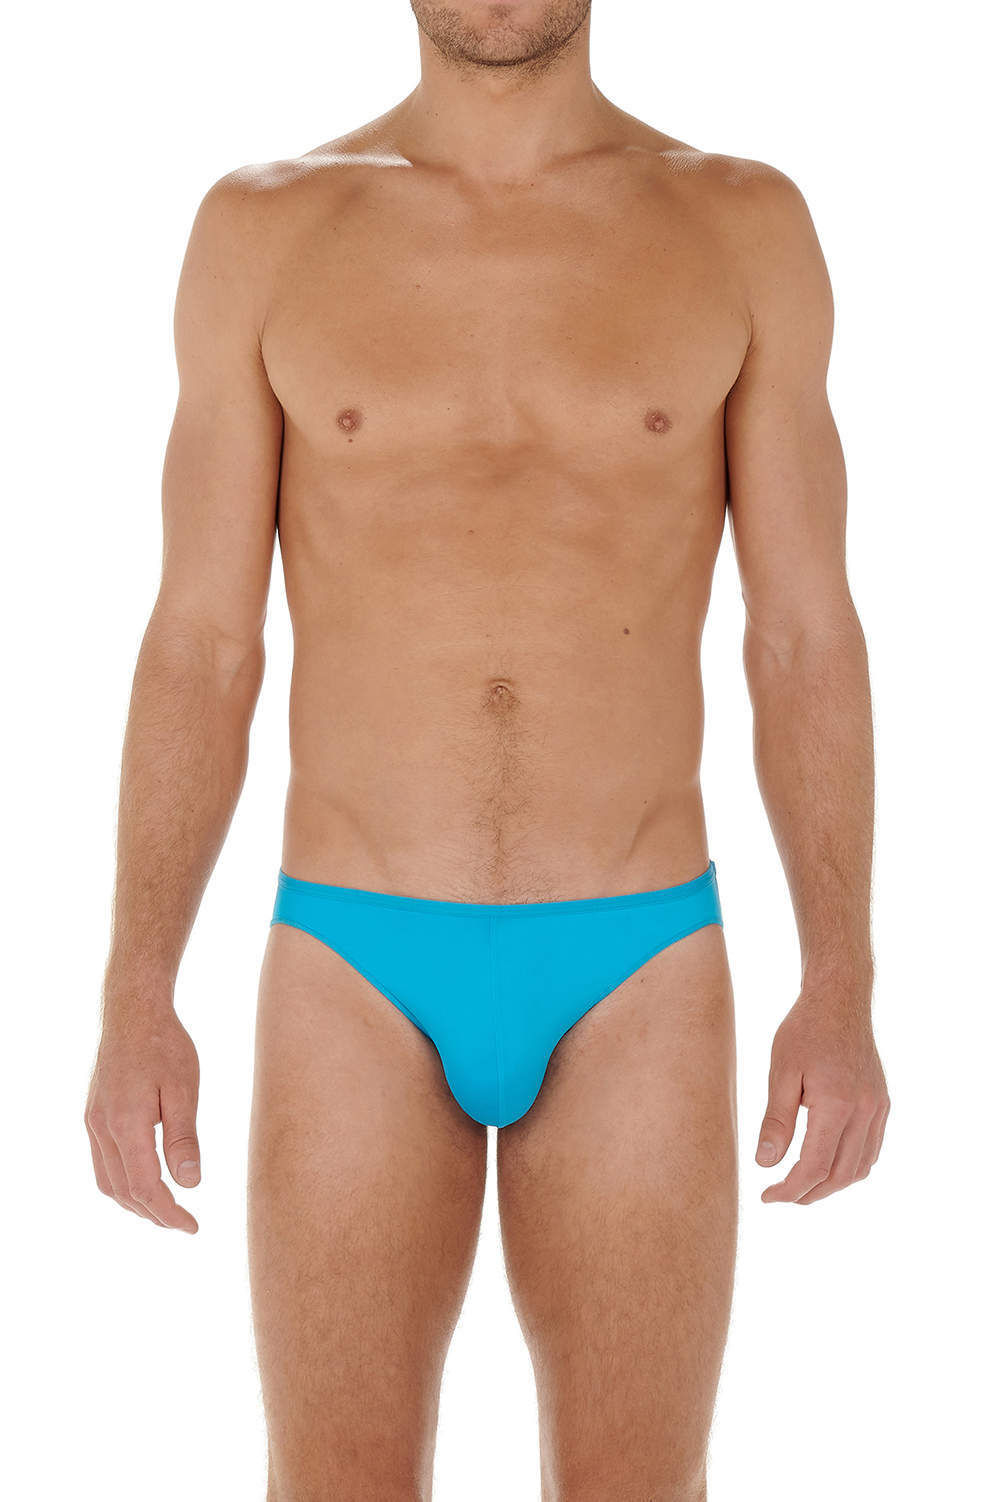 HOM HO1 Plume UP Trunks mens underwear boxer brief male short enhancing  sexy